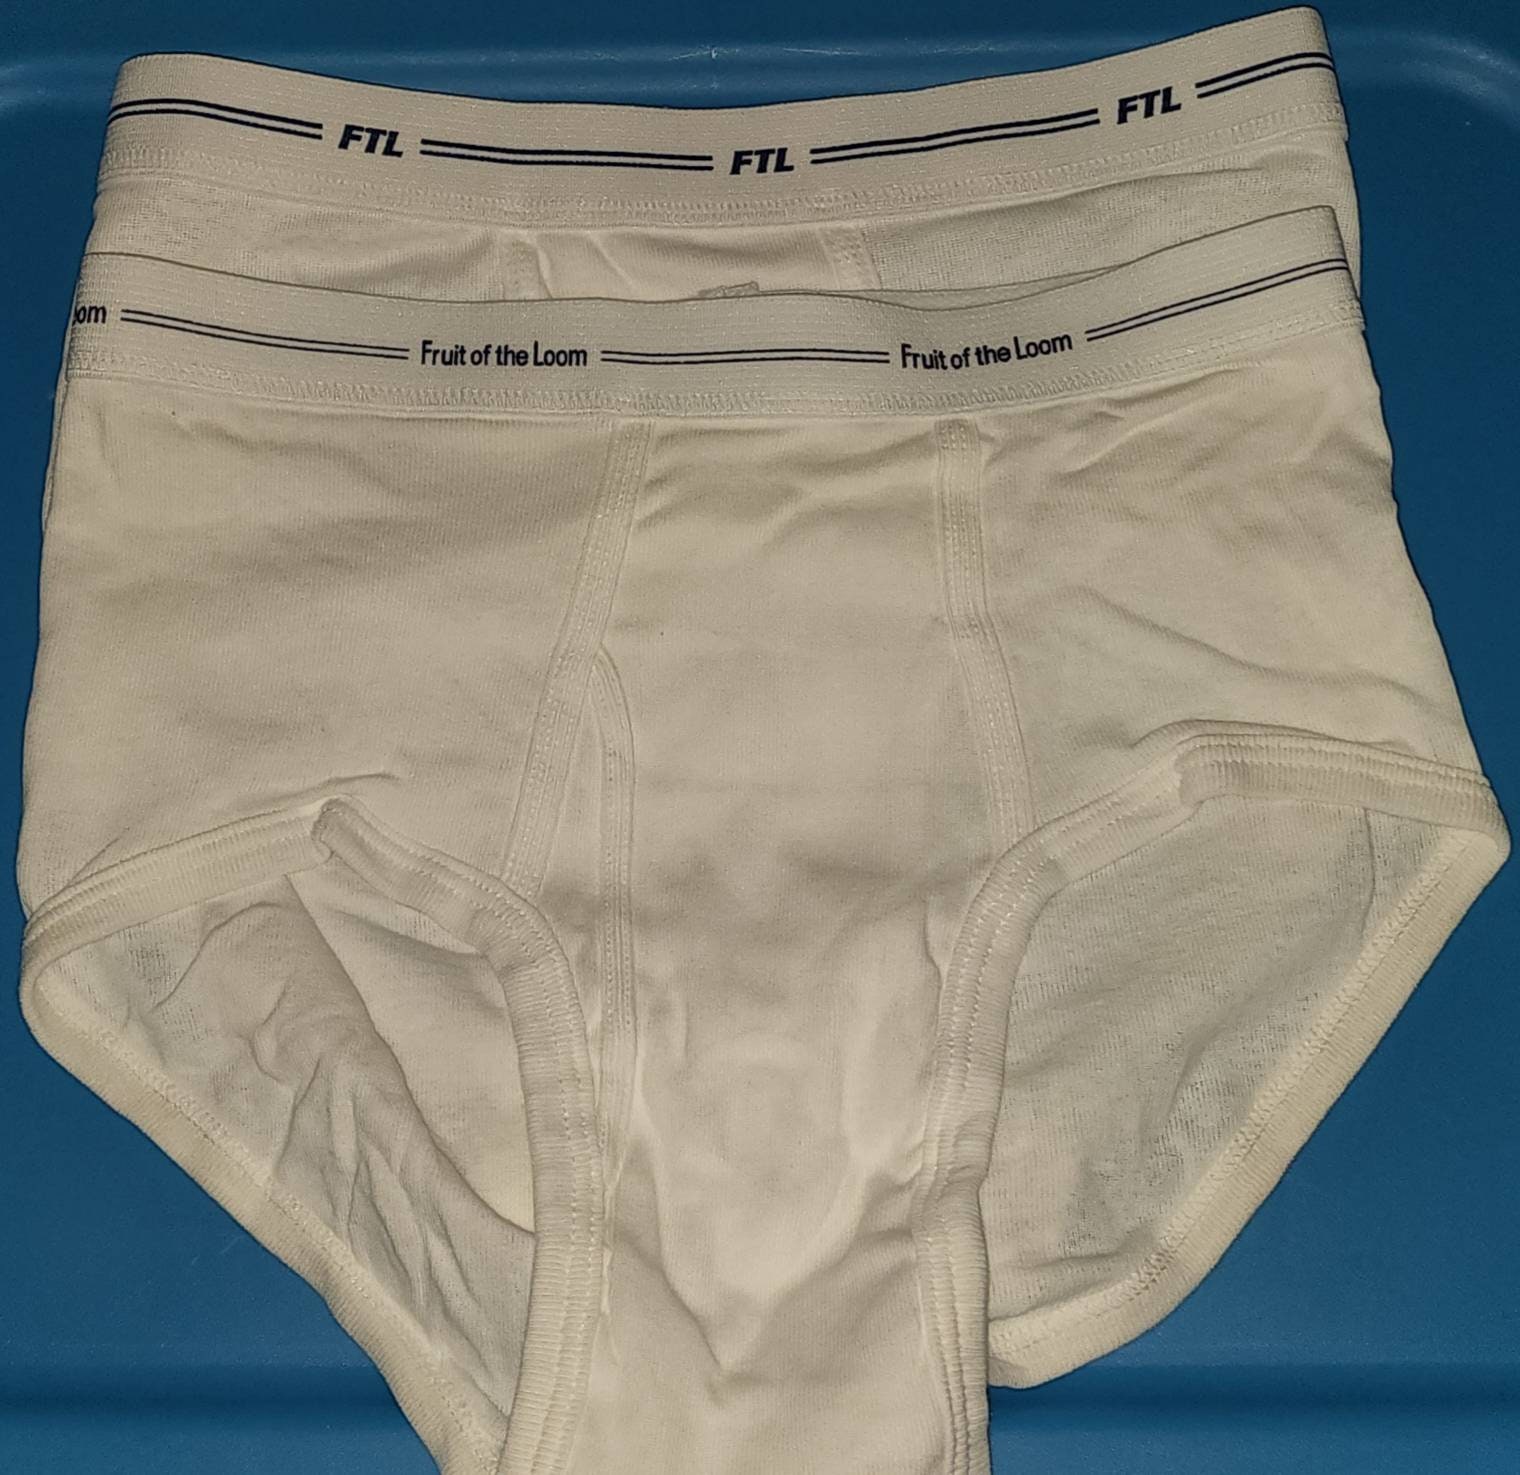 Early/mid 2000s Fruit of the Loom Briefs Mystery Pair. 